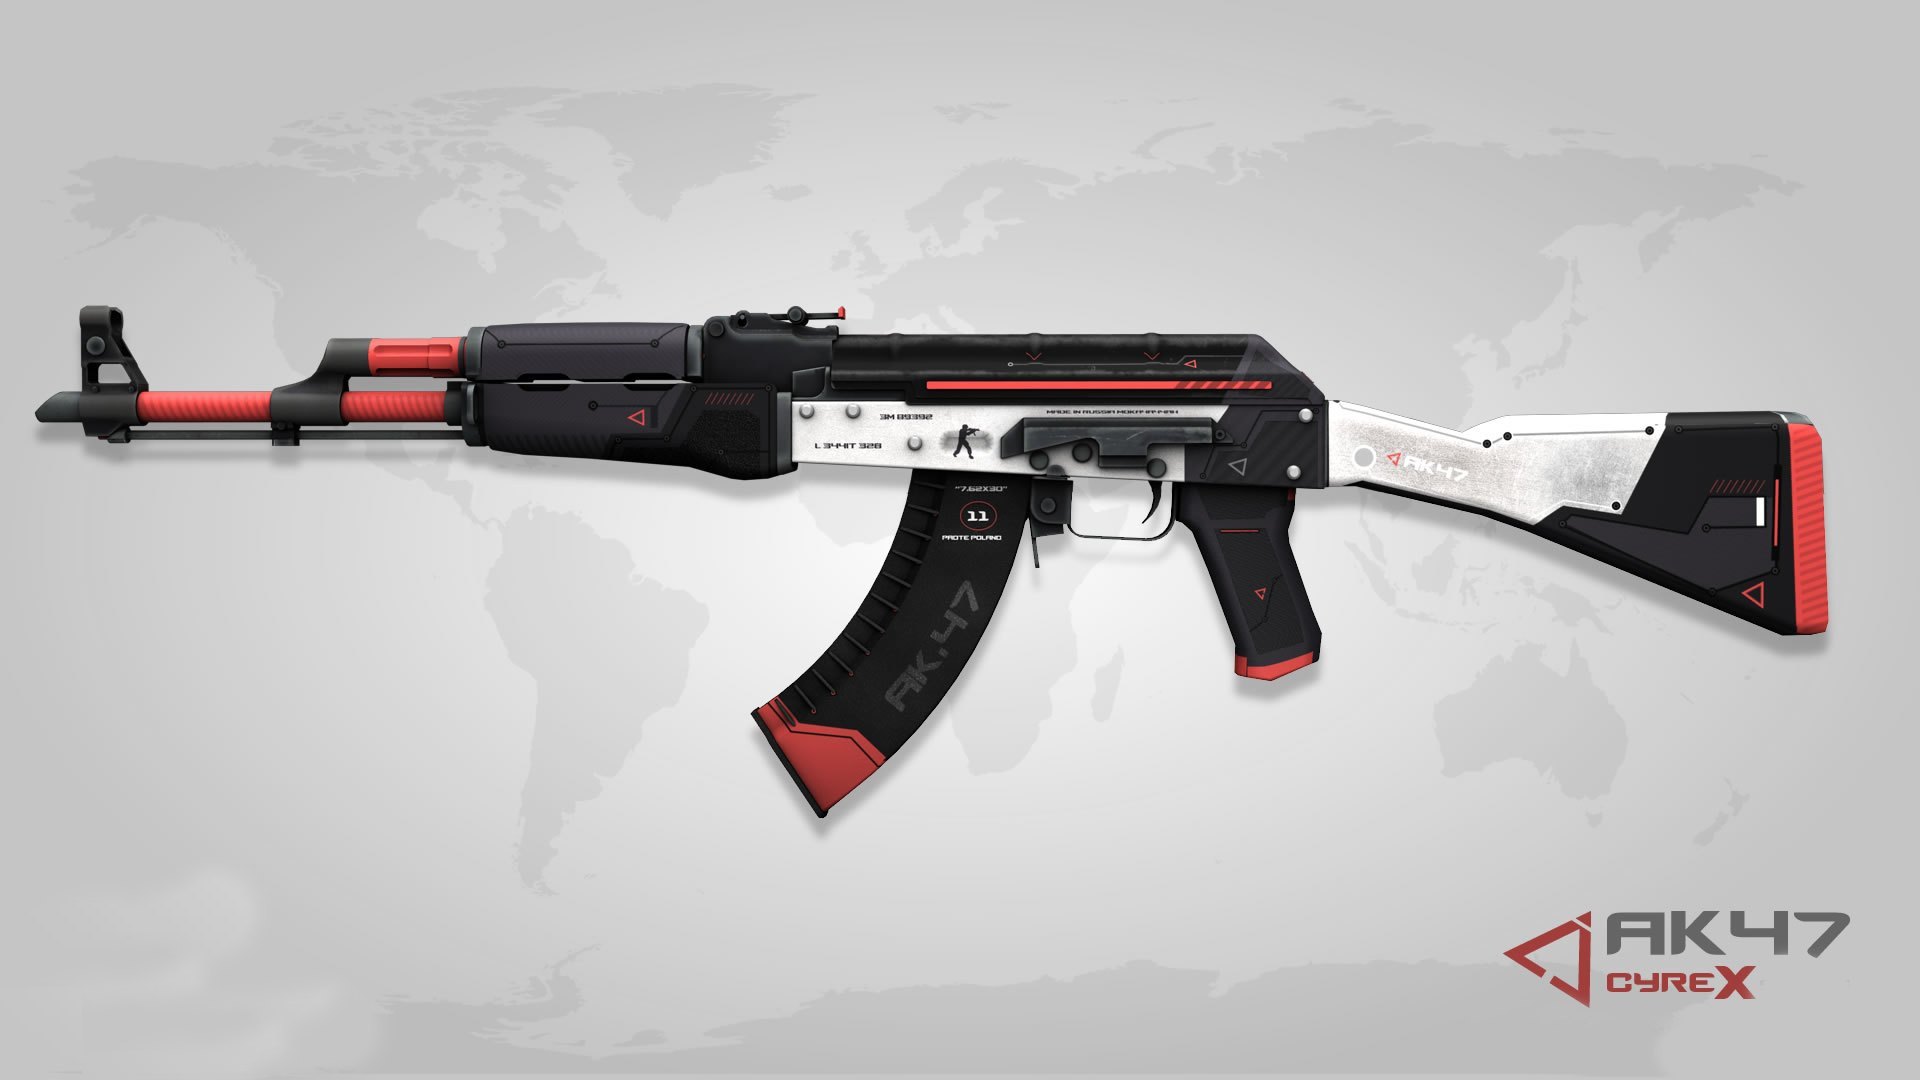 download the last version for android Talon AK47 cs go skin